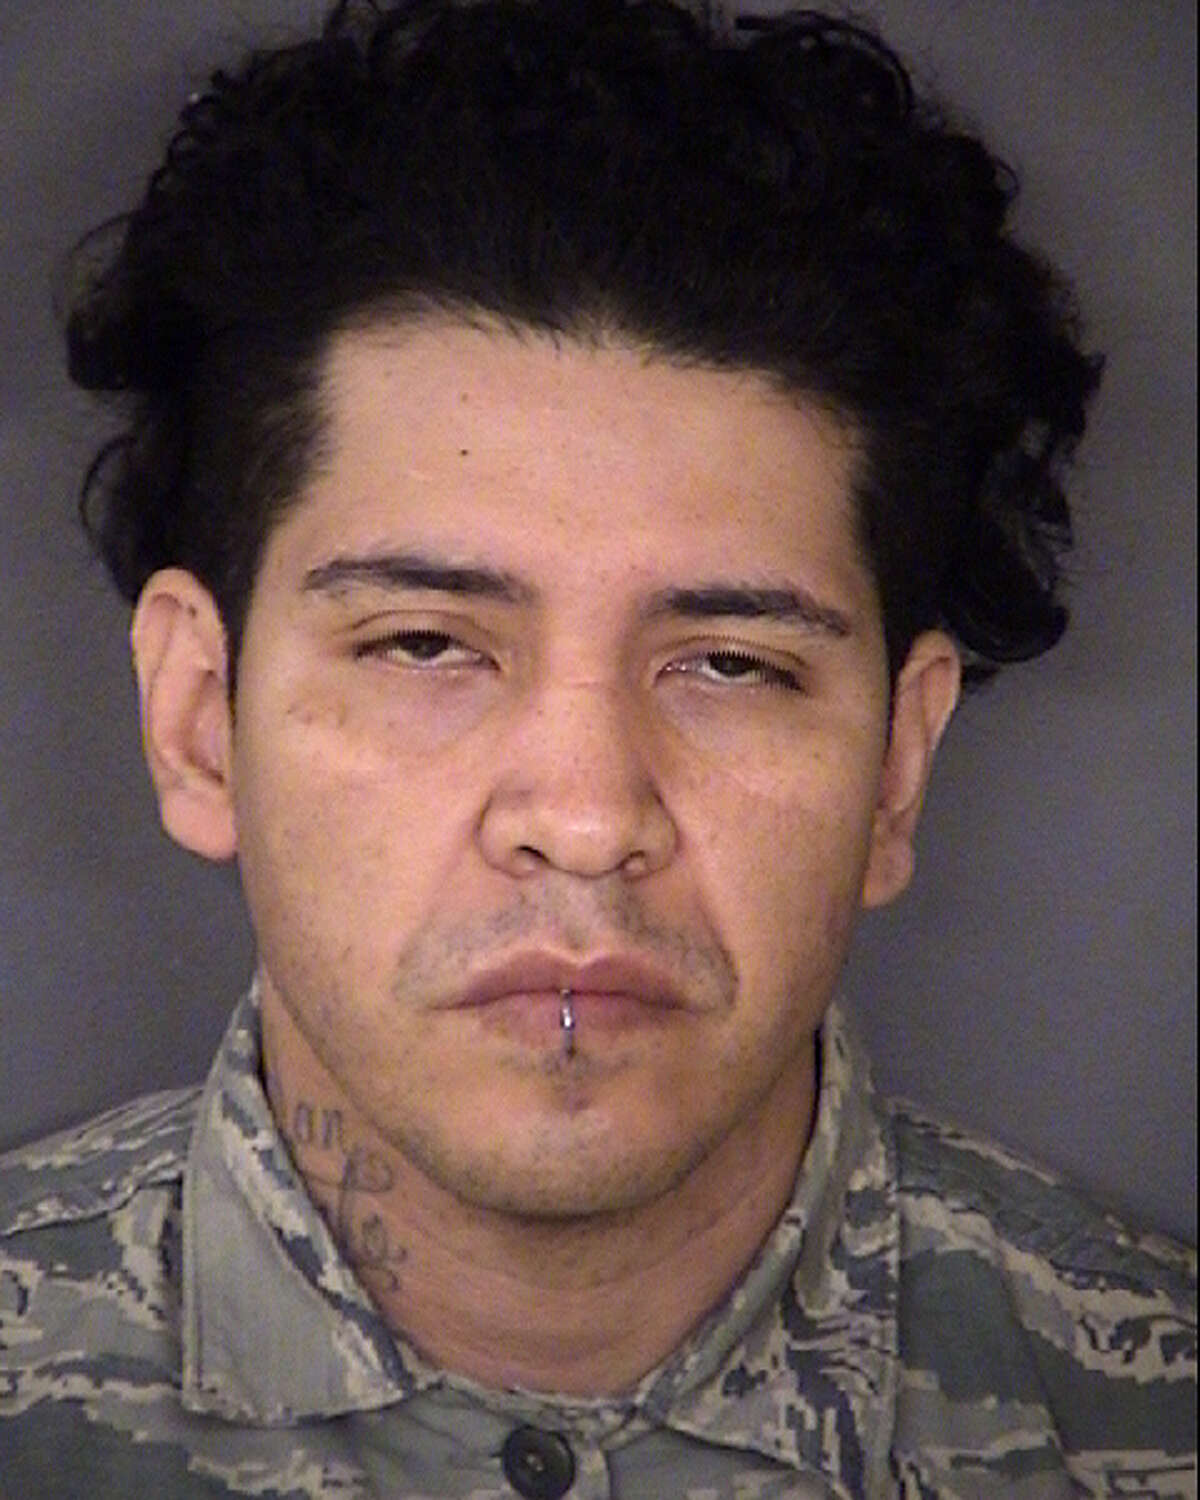 Kenneth Perez, 36, faces a charge of sexual assault of a child. He remains in the Bexar County Jail on a $75,000 bail.